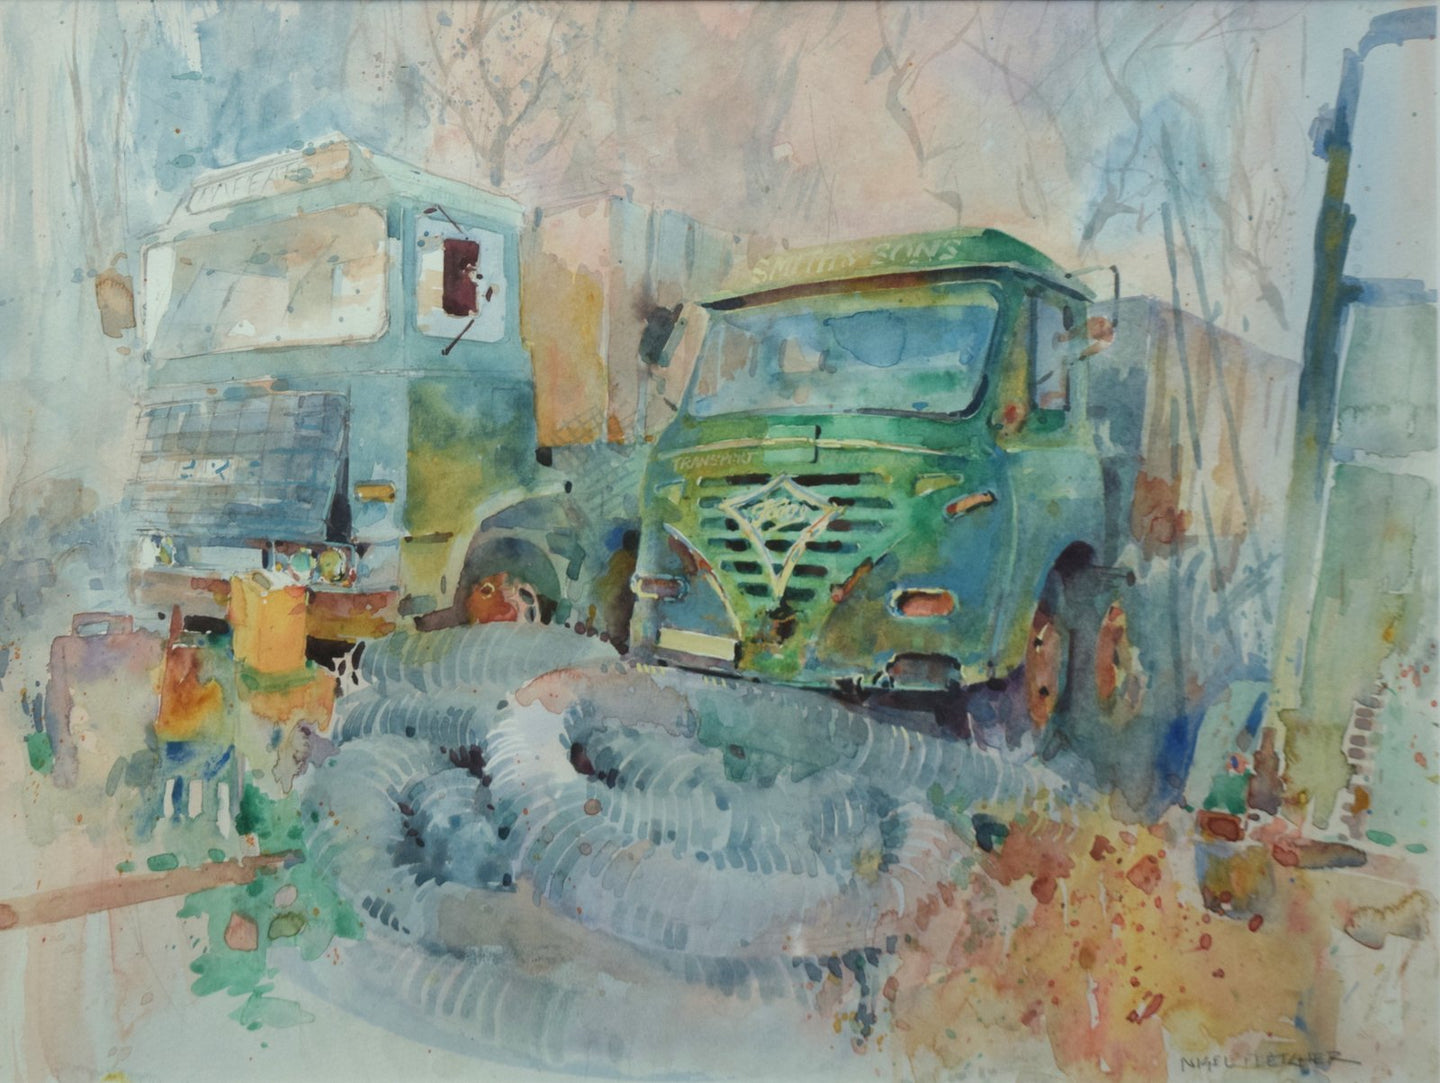 Portrait of two old lorries, rusting away in their graveyard, with a tangle of flexible pipework in the foreground.